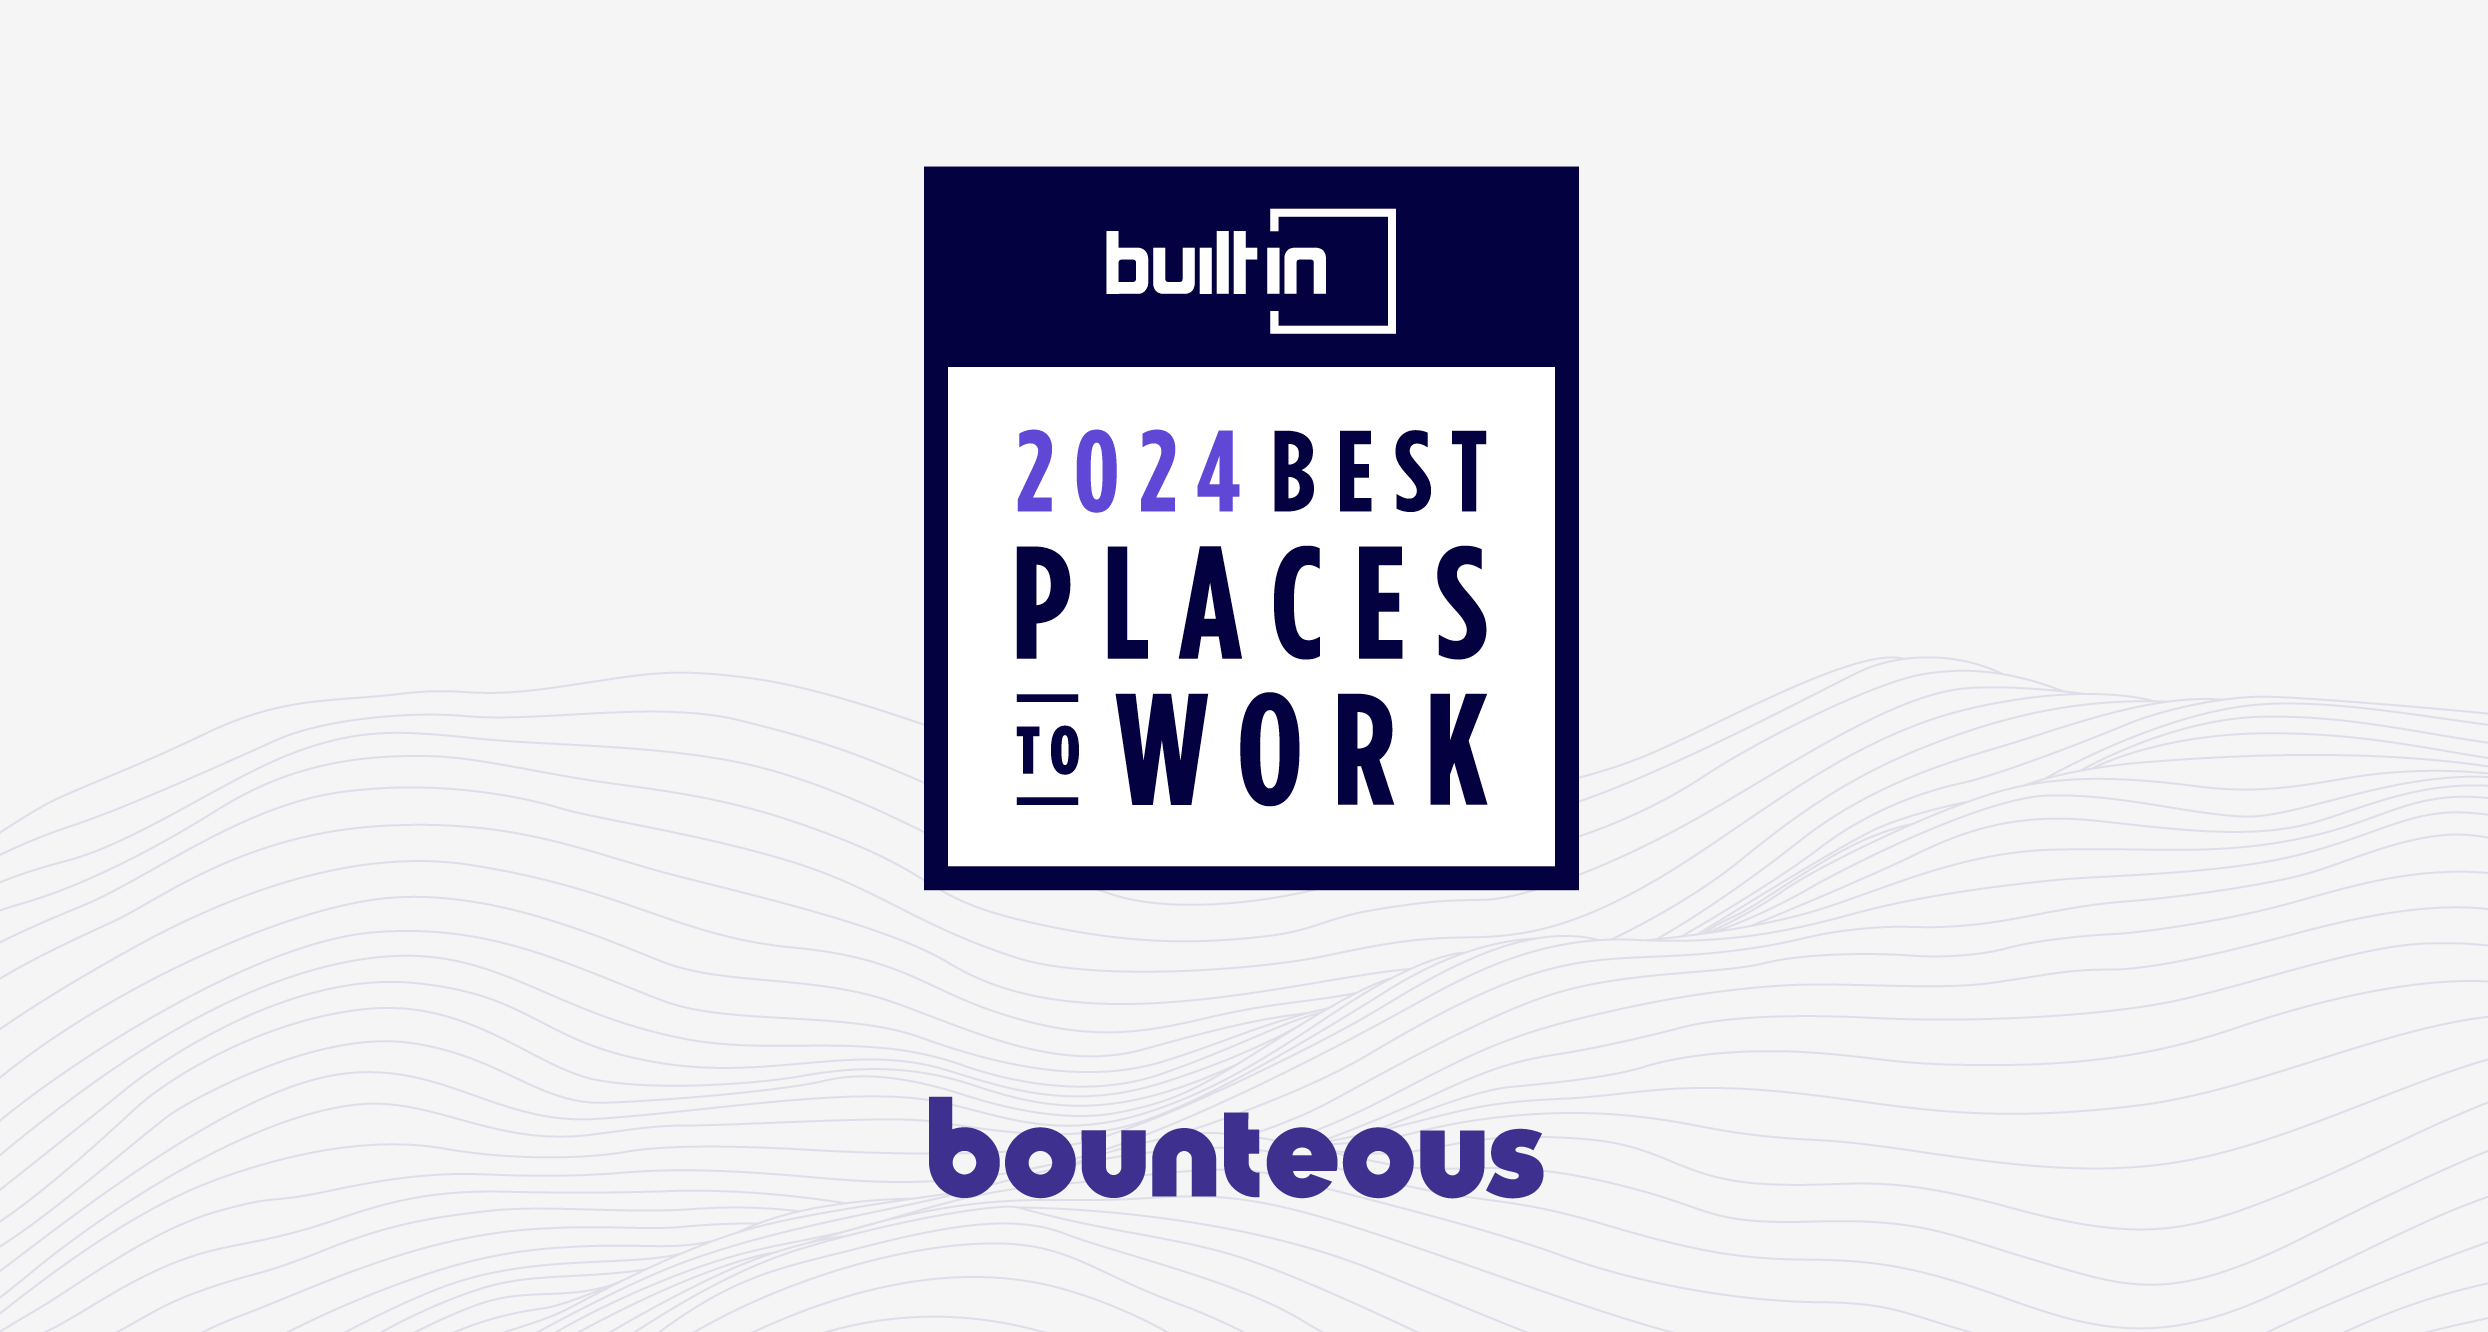 Built In Honors Bounteous in Its Esteemed 2024 Best Places To Work Awards 